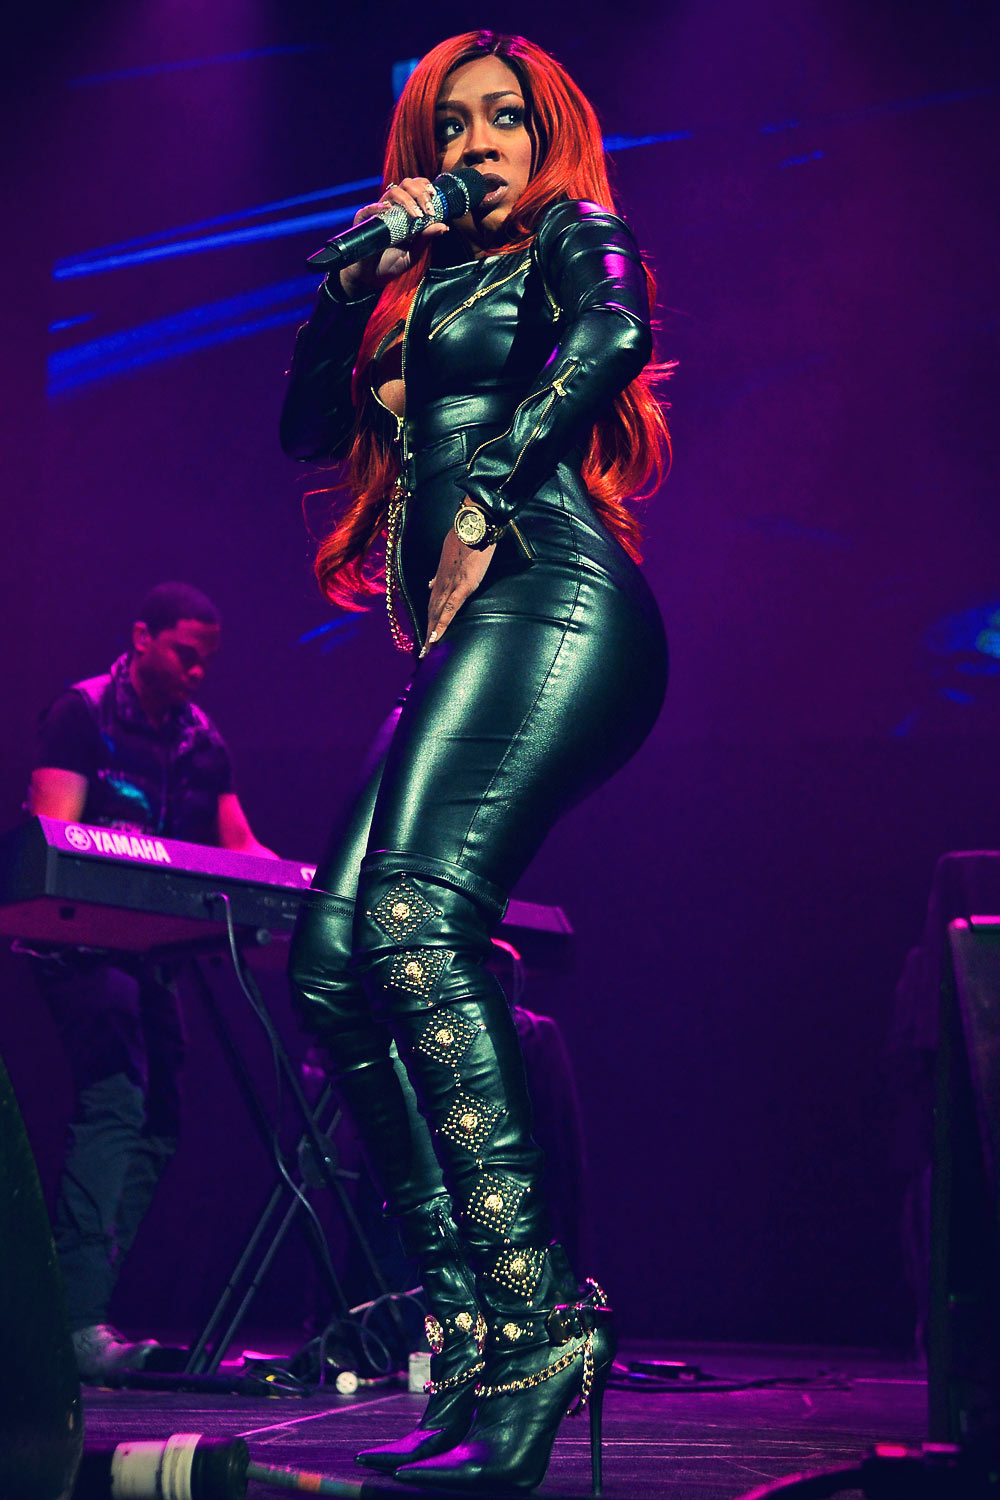 K Michelle performs in leather catsuit